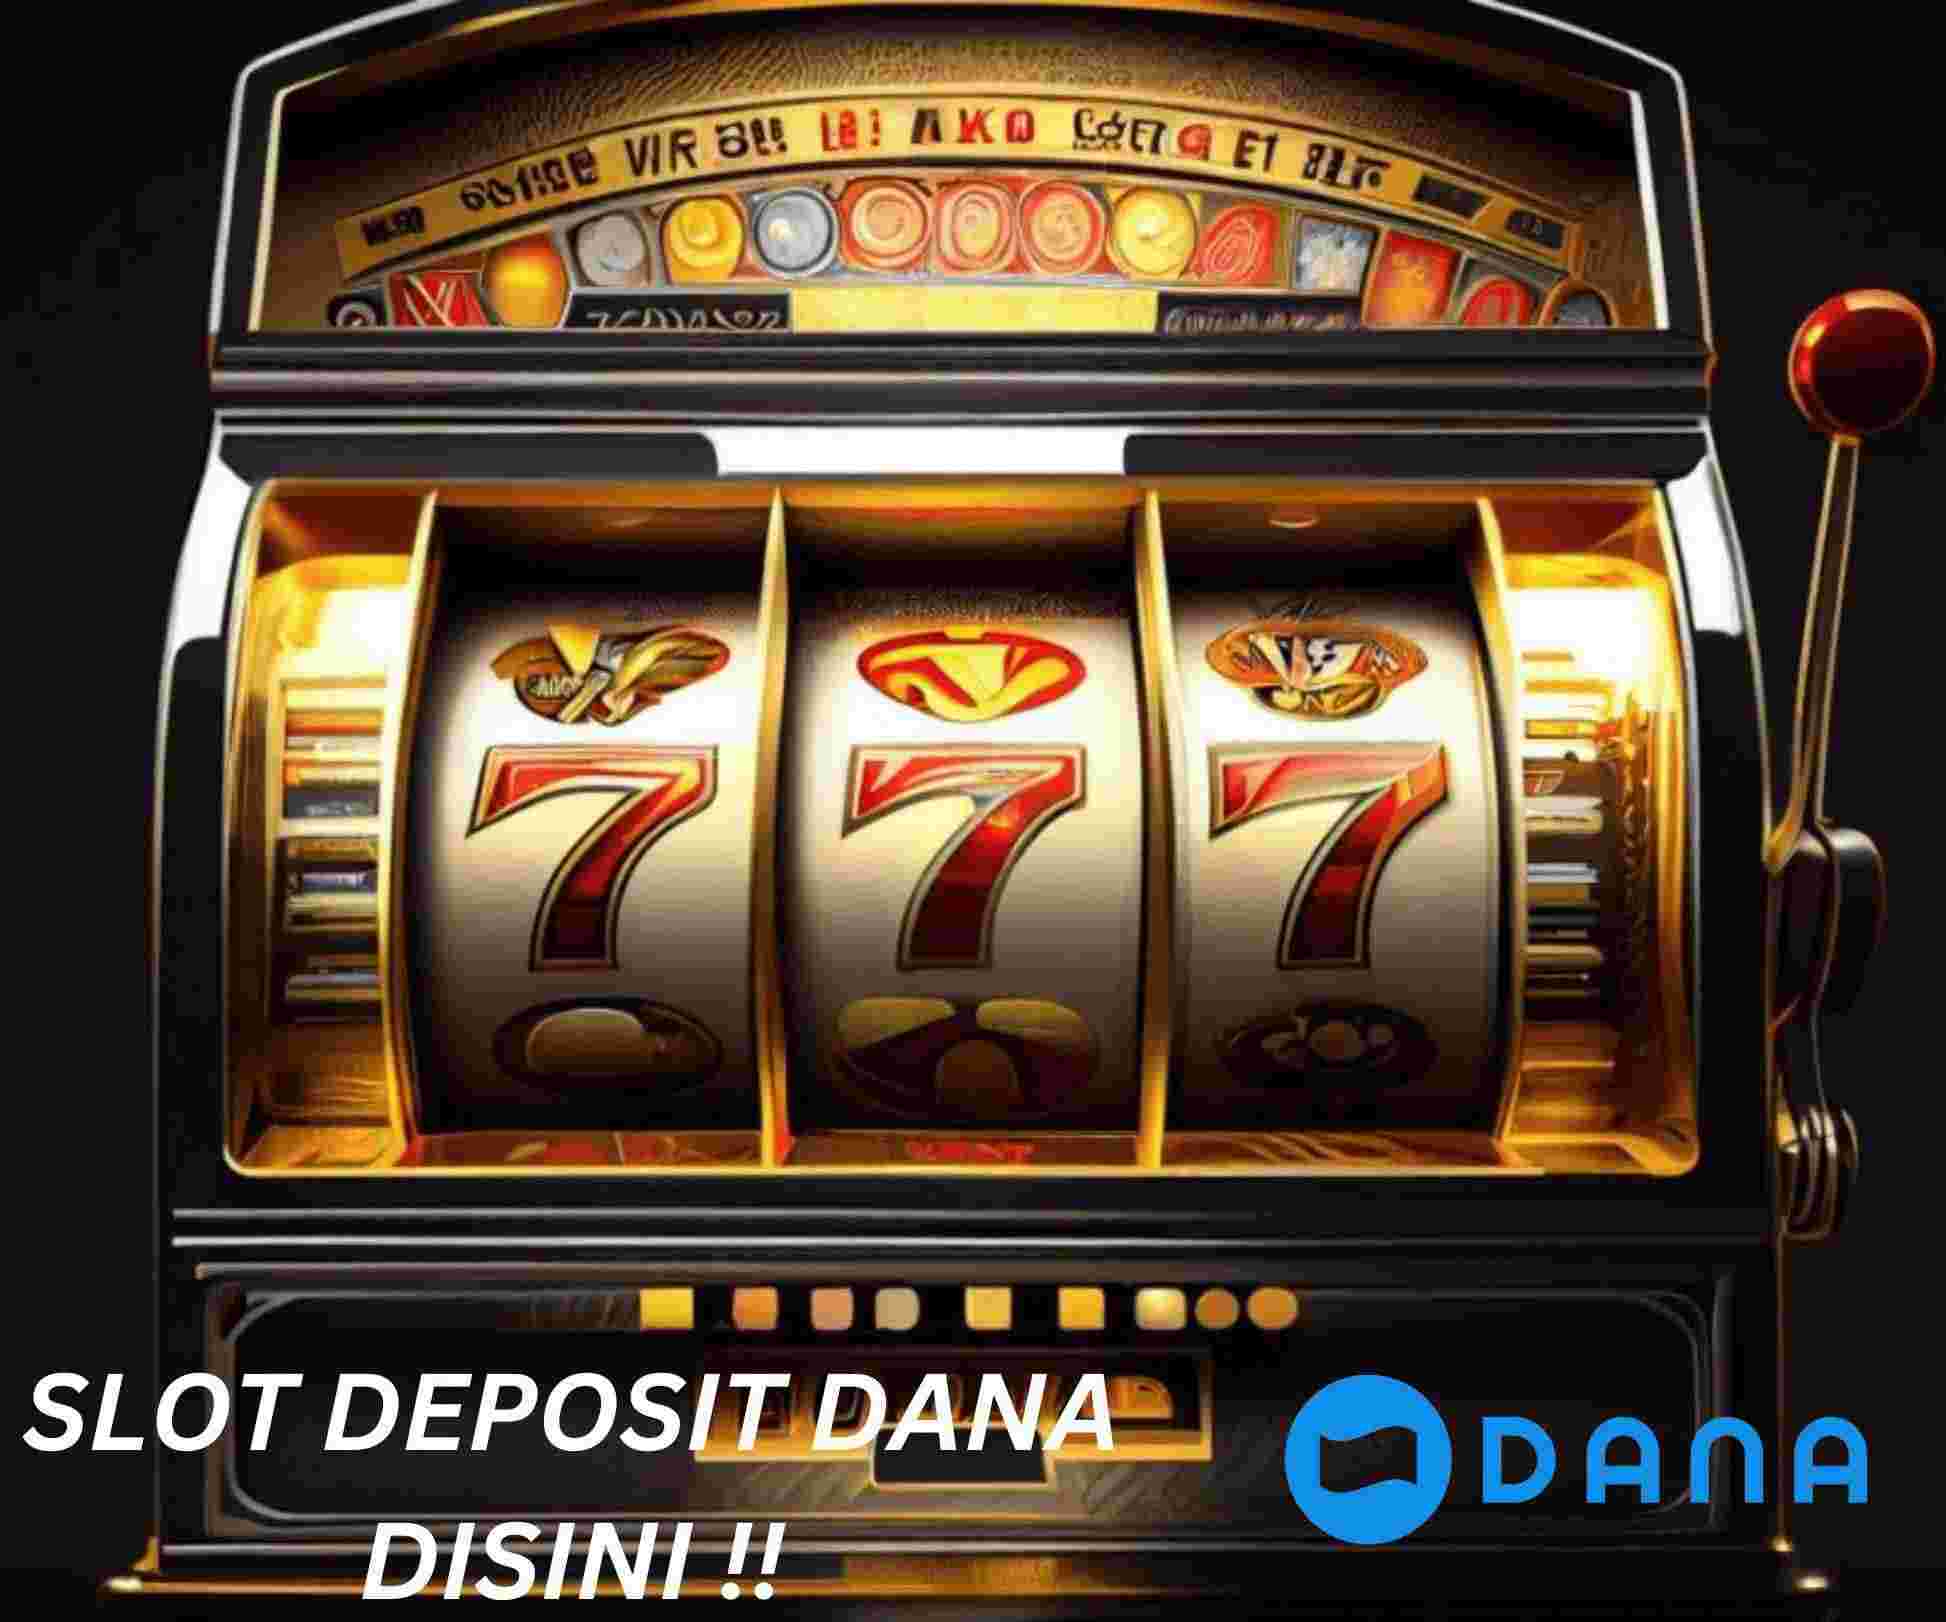 Cheap deposits only in the slot deposit 5000